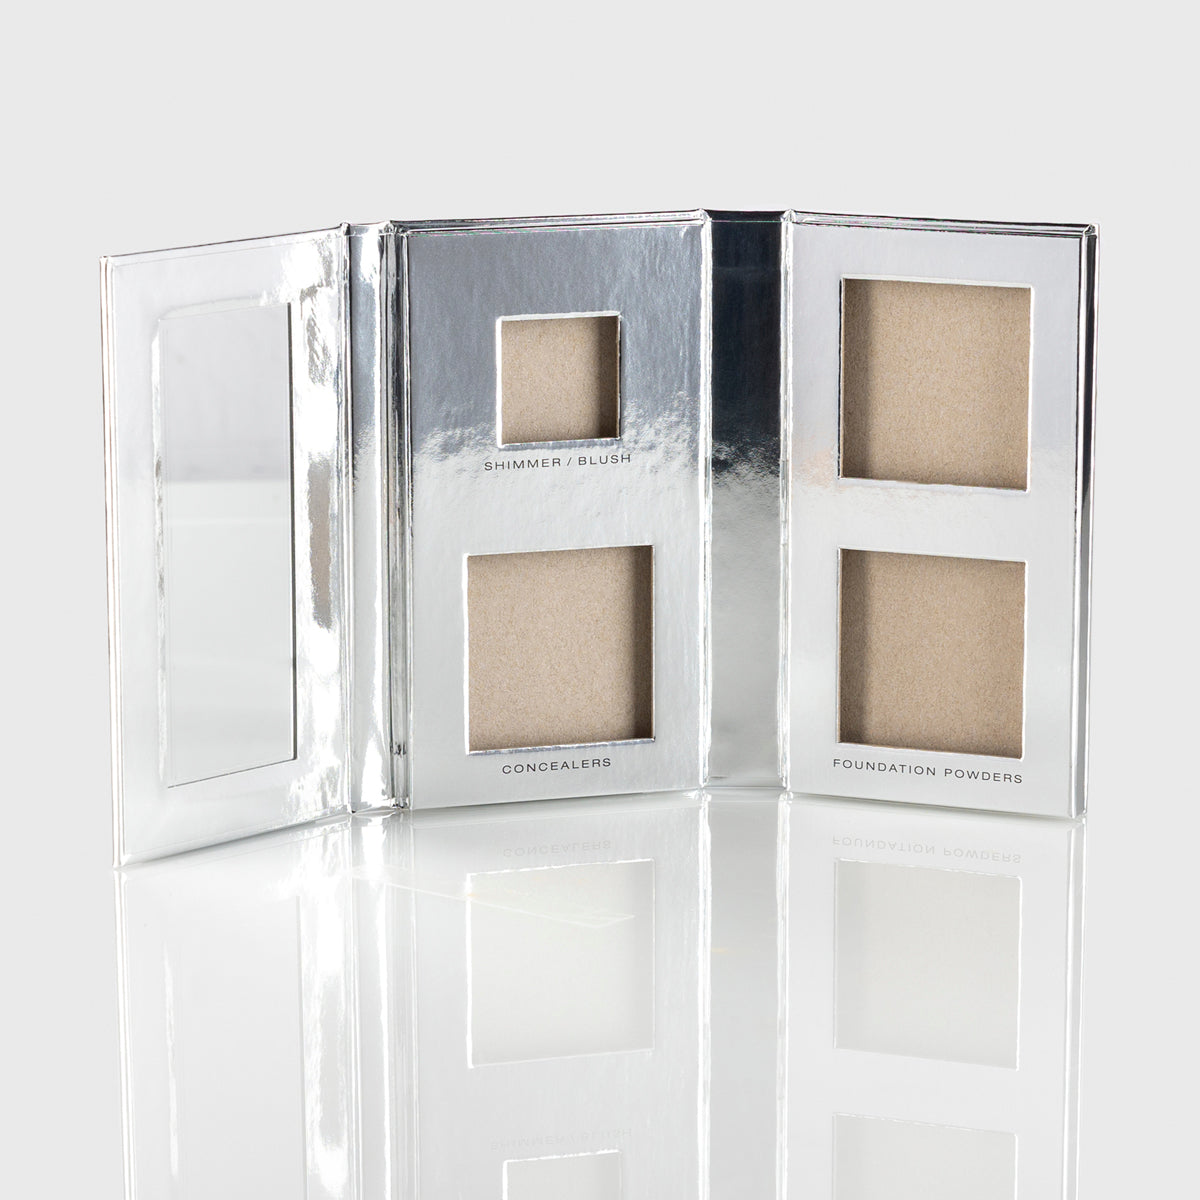 Fold Out Complexion® Empty Refillable Palette (Build Your Own)